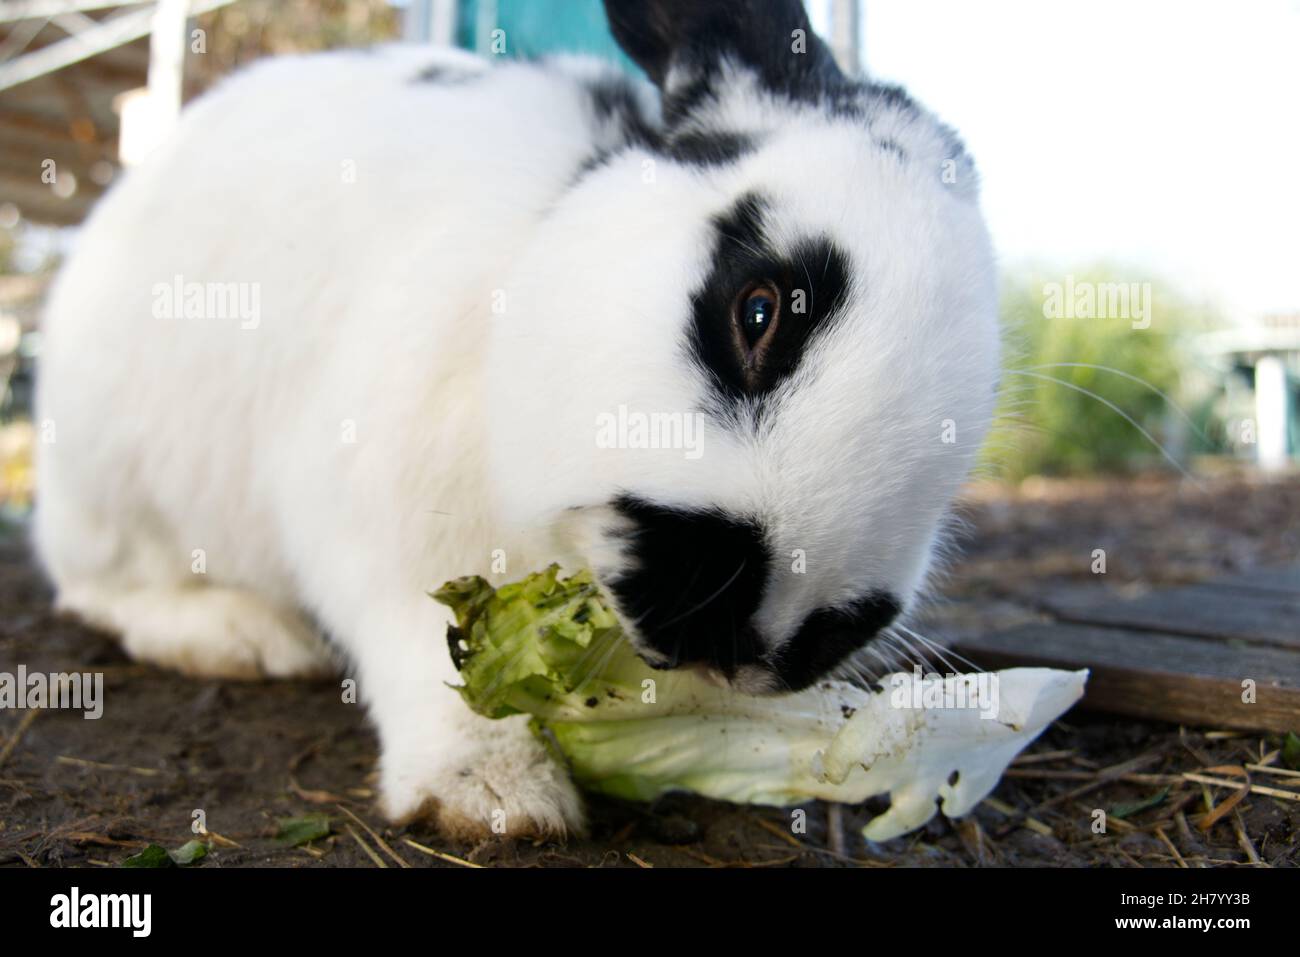 A cute pet rabbit nibbling on some lettuce Stock Photo